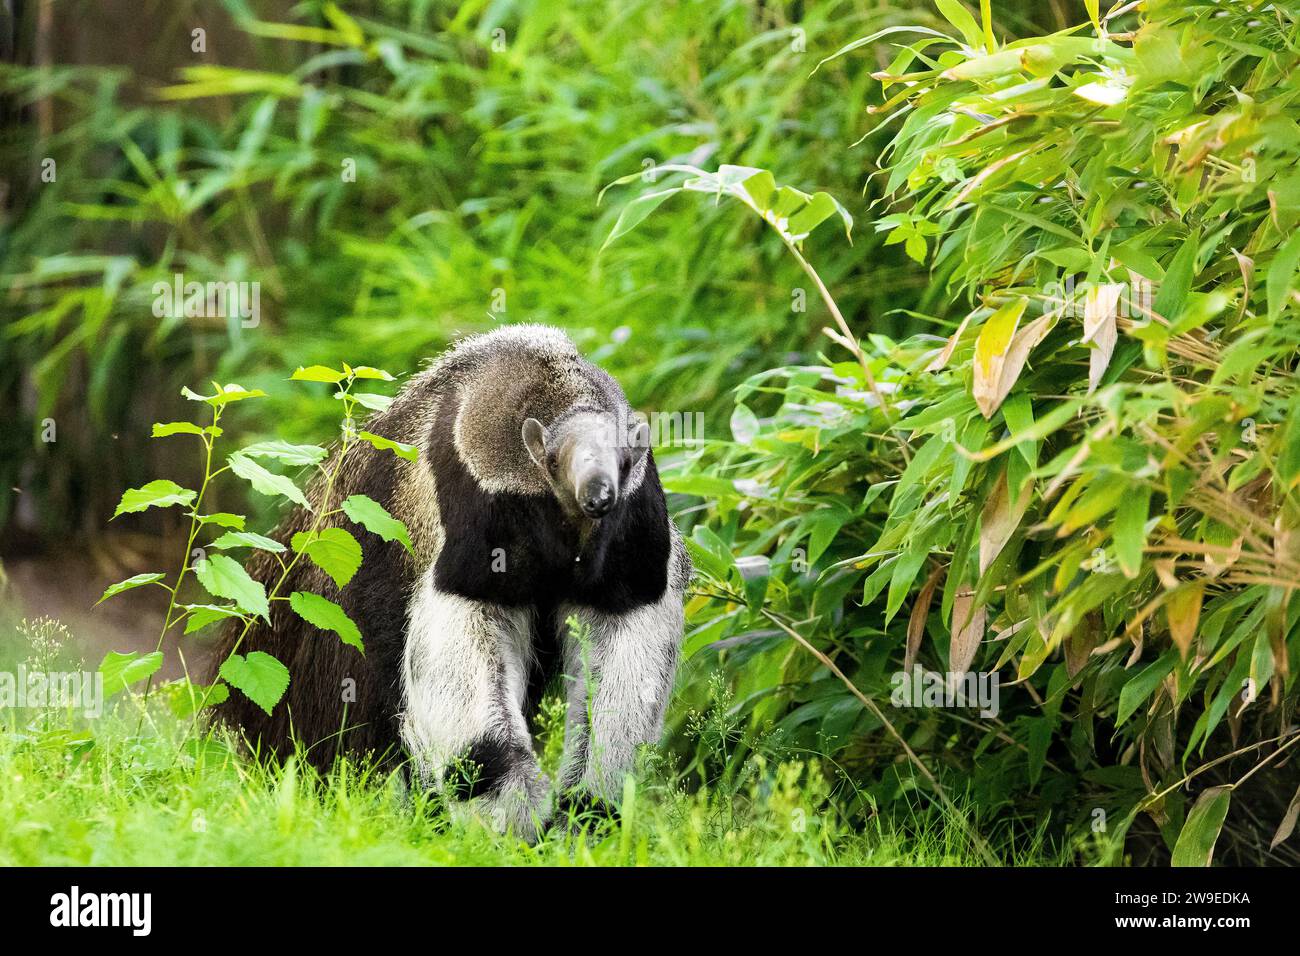 Myrmecophaga tridactyla, Giant anteater. large shaggy animal with long nose walks through grass. Protecting rare animals in European zoos Stock Photo